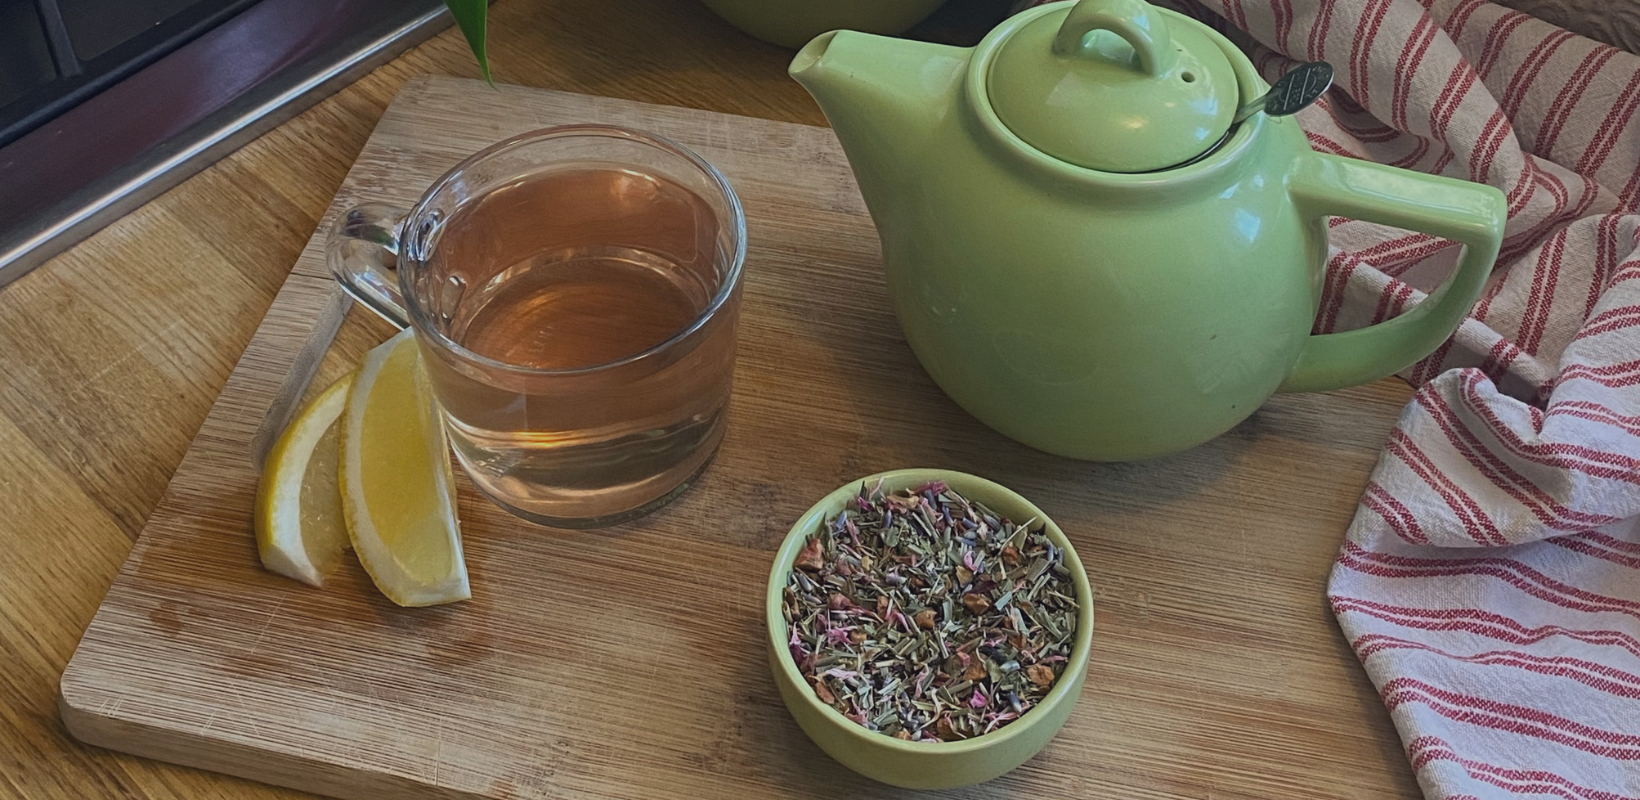 About T. Kettle premium loose leaf tea blends: naturally sourced, organic loose leaf tea, matcha and tea accessories